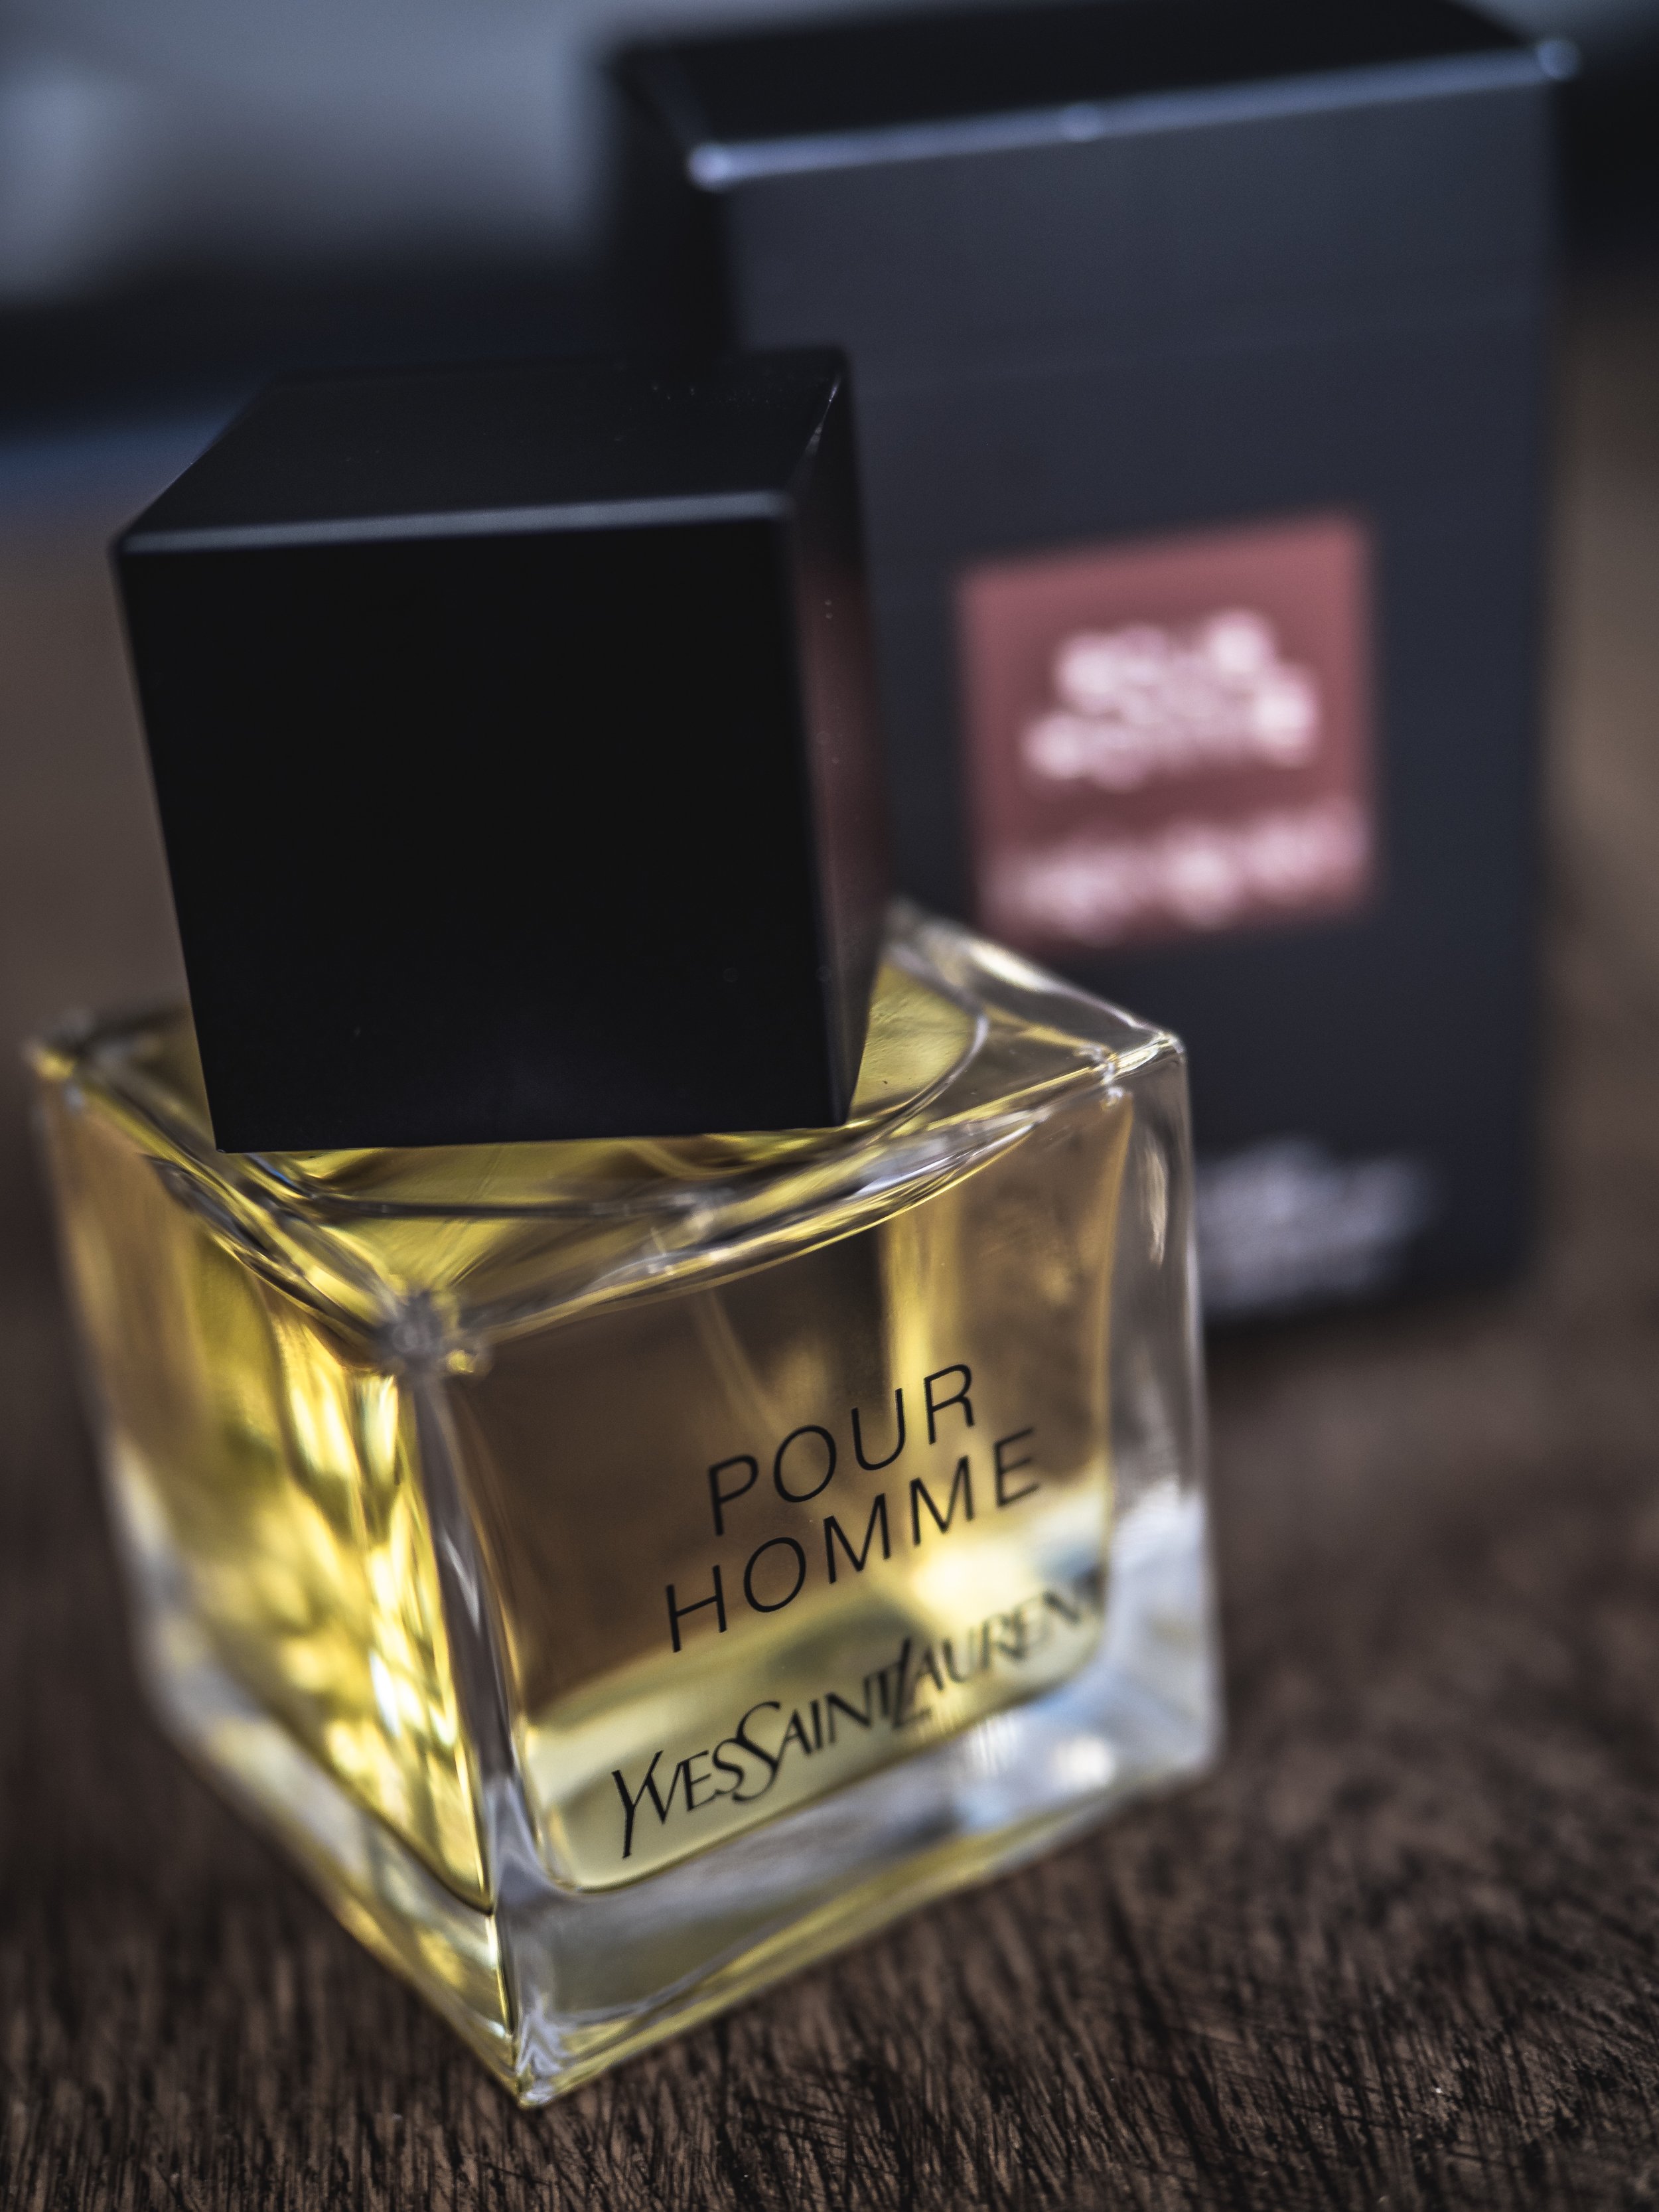 Yves Saint Laurent pour homme Винтаж. Yves Saint Laurent pour homme пиджак. Парфюм 1971. Pour homme yves